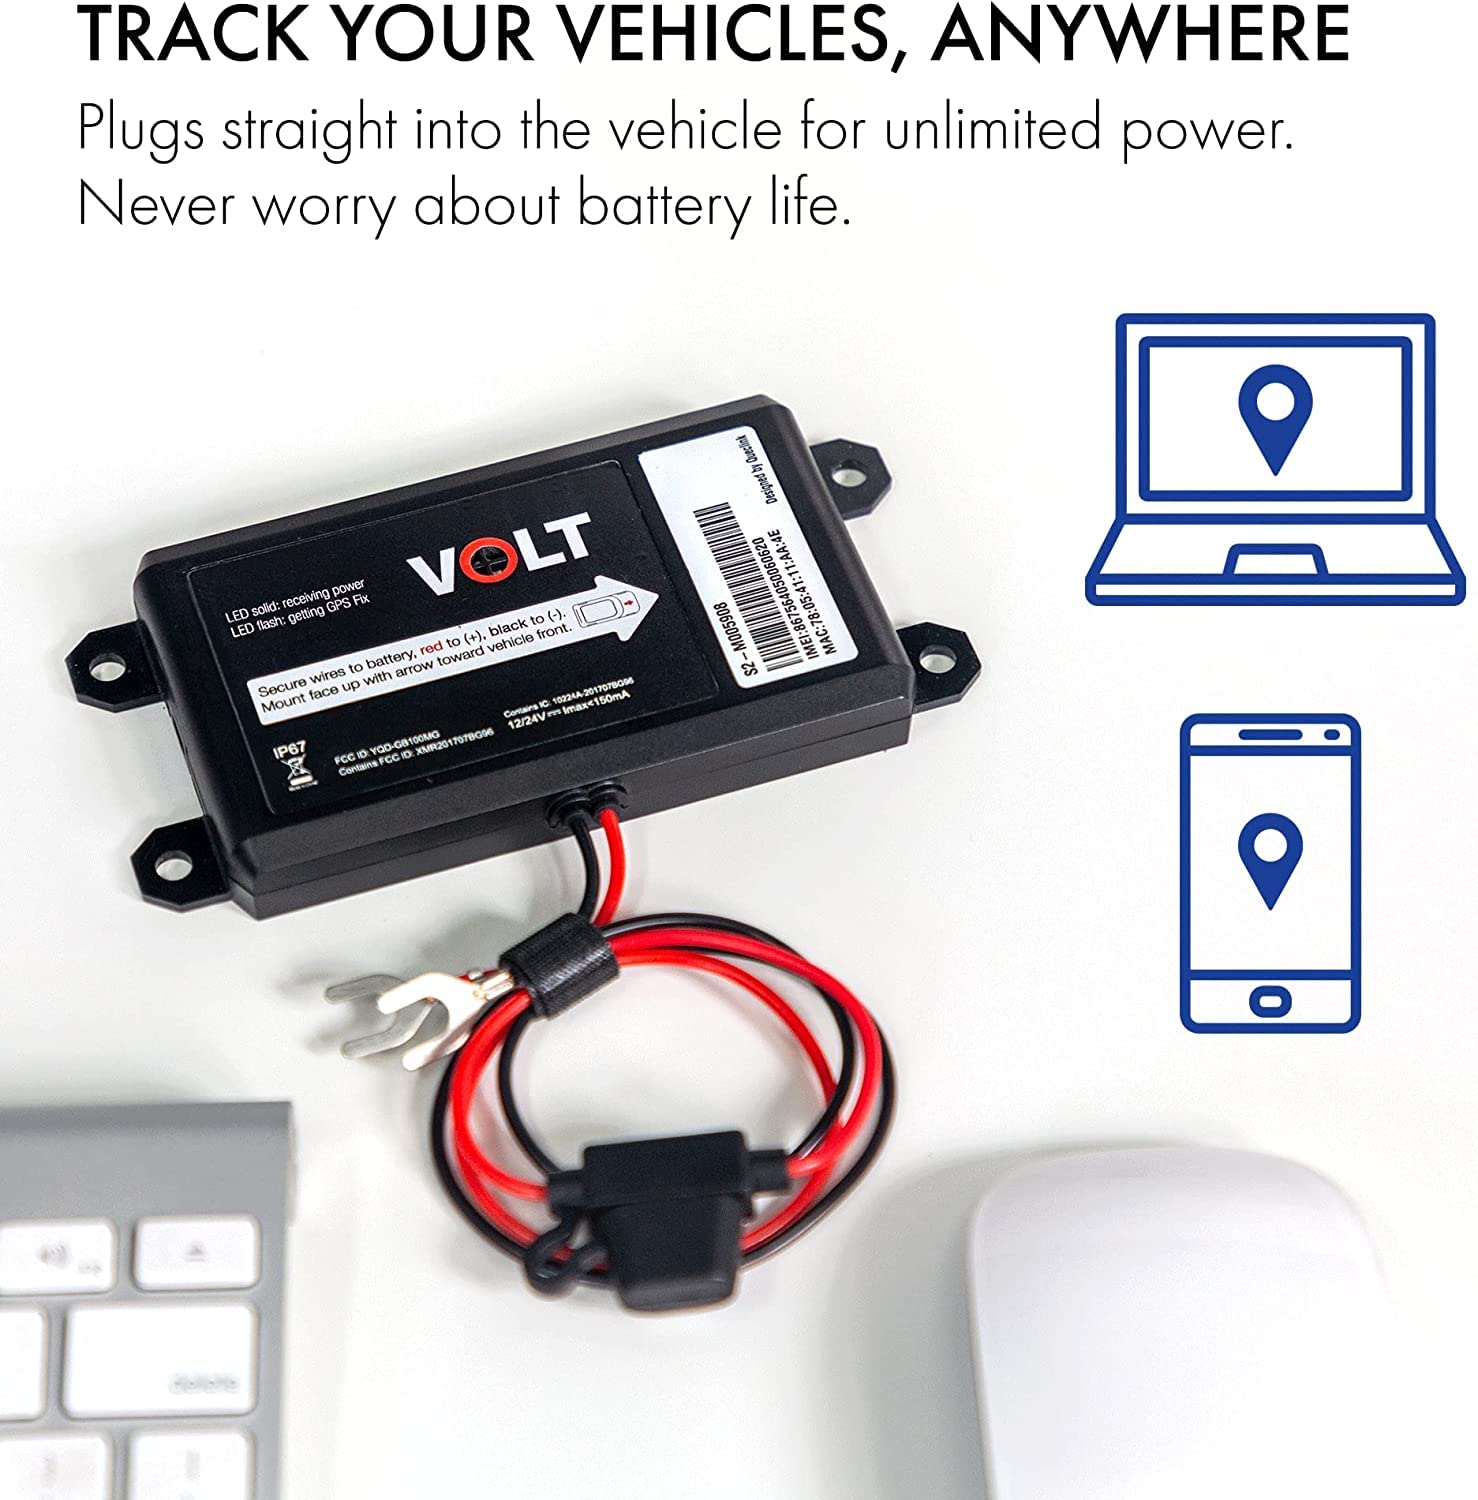 Lightning GPS Real Time GPS Tracker for Vehicles - Fleet GPS Tracker Automotive Tracking Device - Cars Hidden GPS Tracking Device - Car GPS Tracker Device - Car Tracker Device Subscription Required